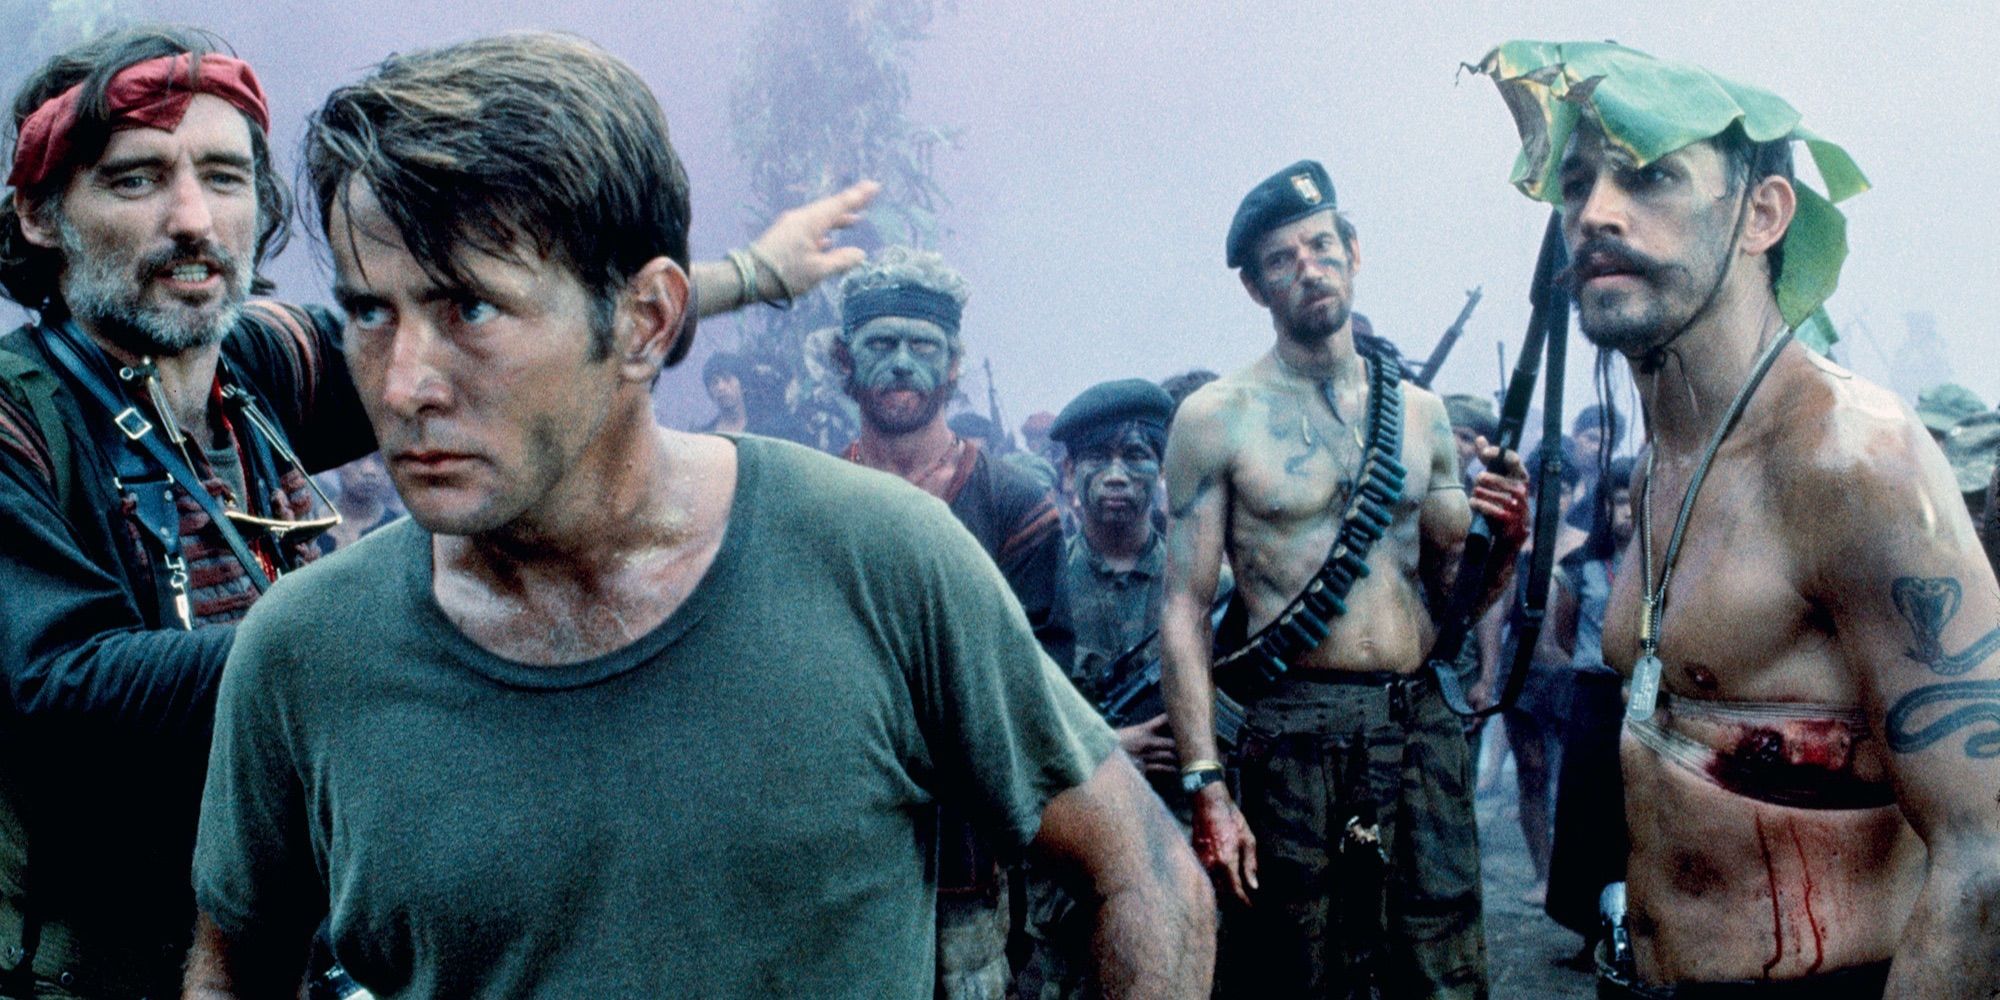 A group of soldiers in Apocalypse Now